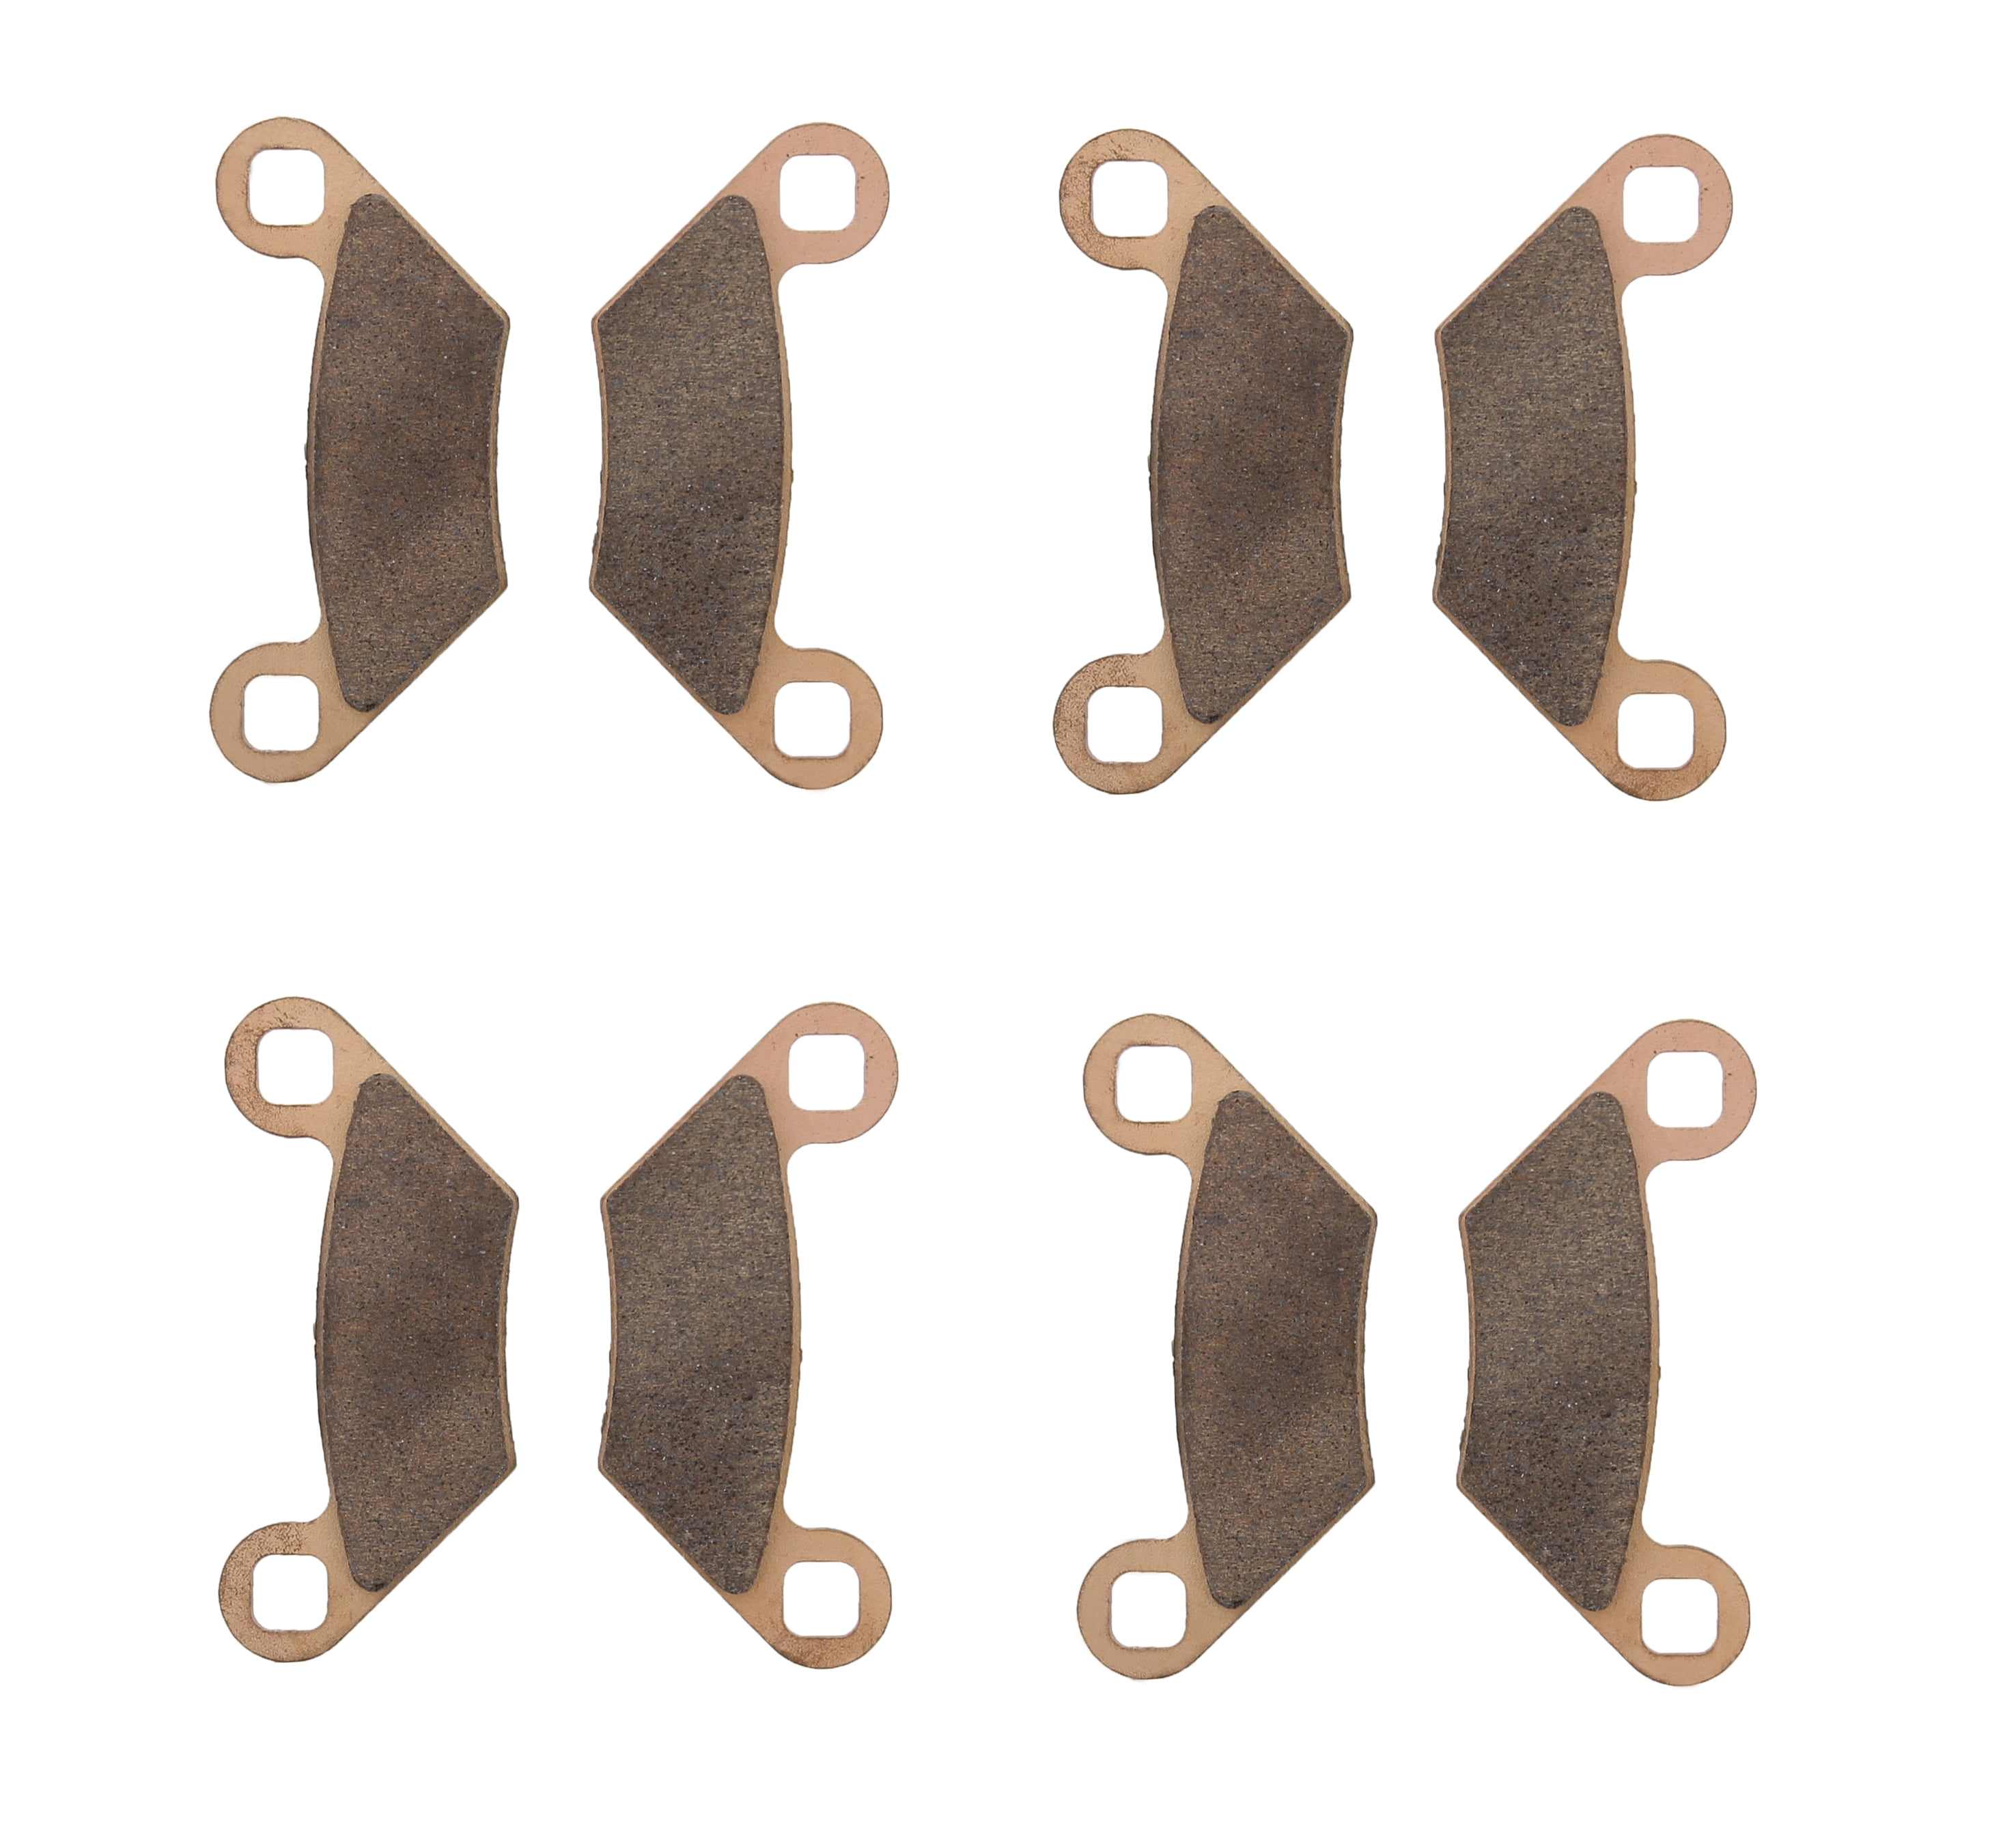 Brake Pads for Polaris 1000 RZR XP EPS 2014-2019 Front and Rear by Race-Driven